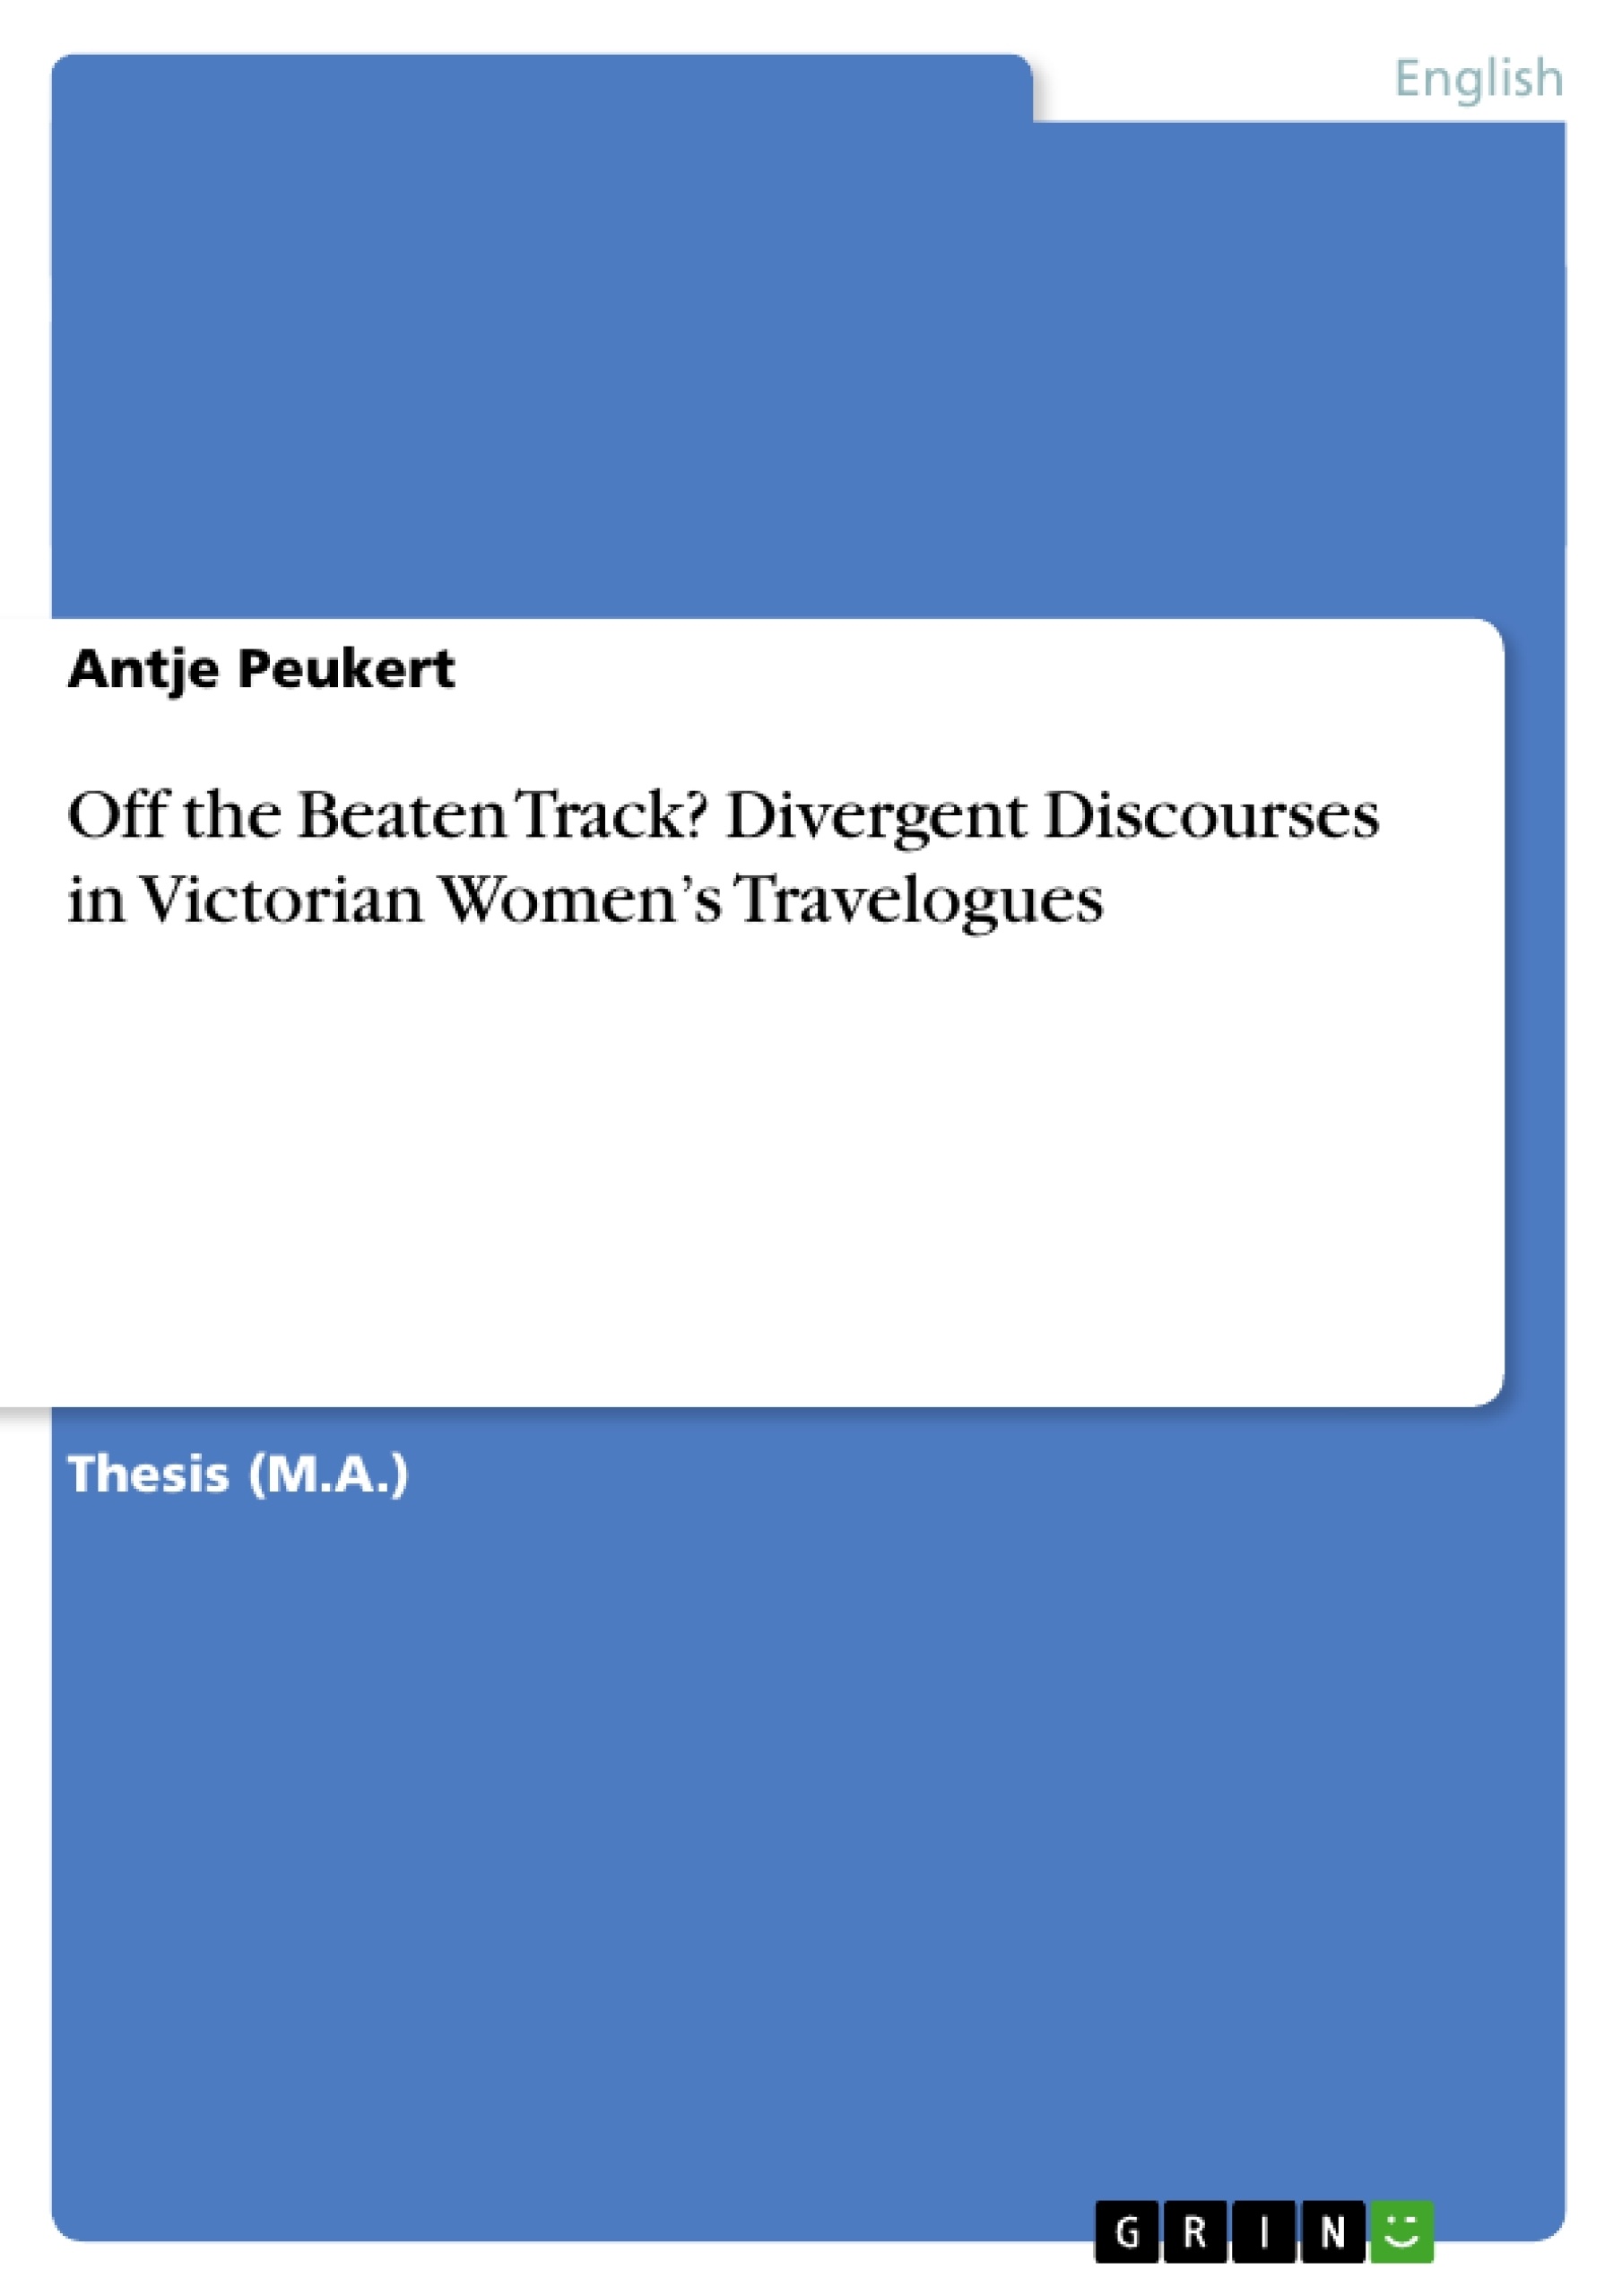 Title: Off the Beaten Track? Divergent Discourses in Victorian Women’s Travelogues